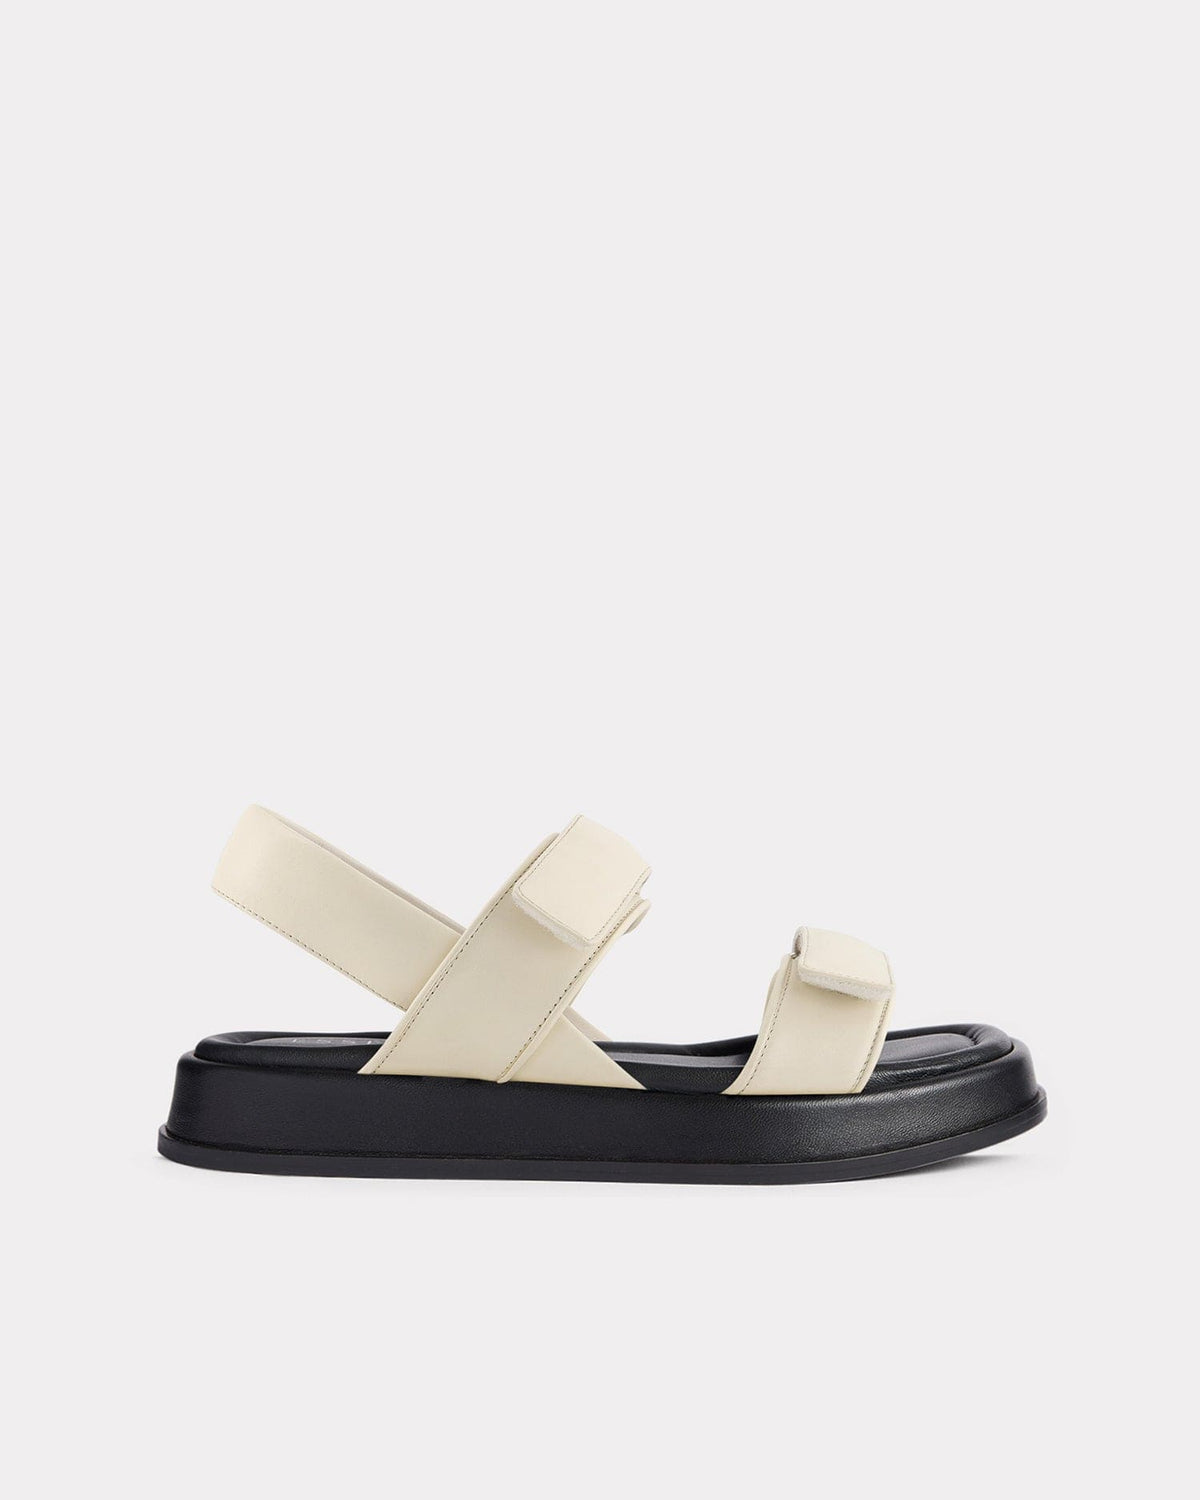 chunky double strapped sandals in butter